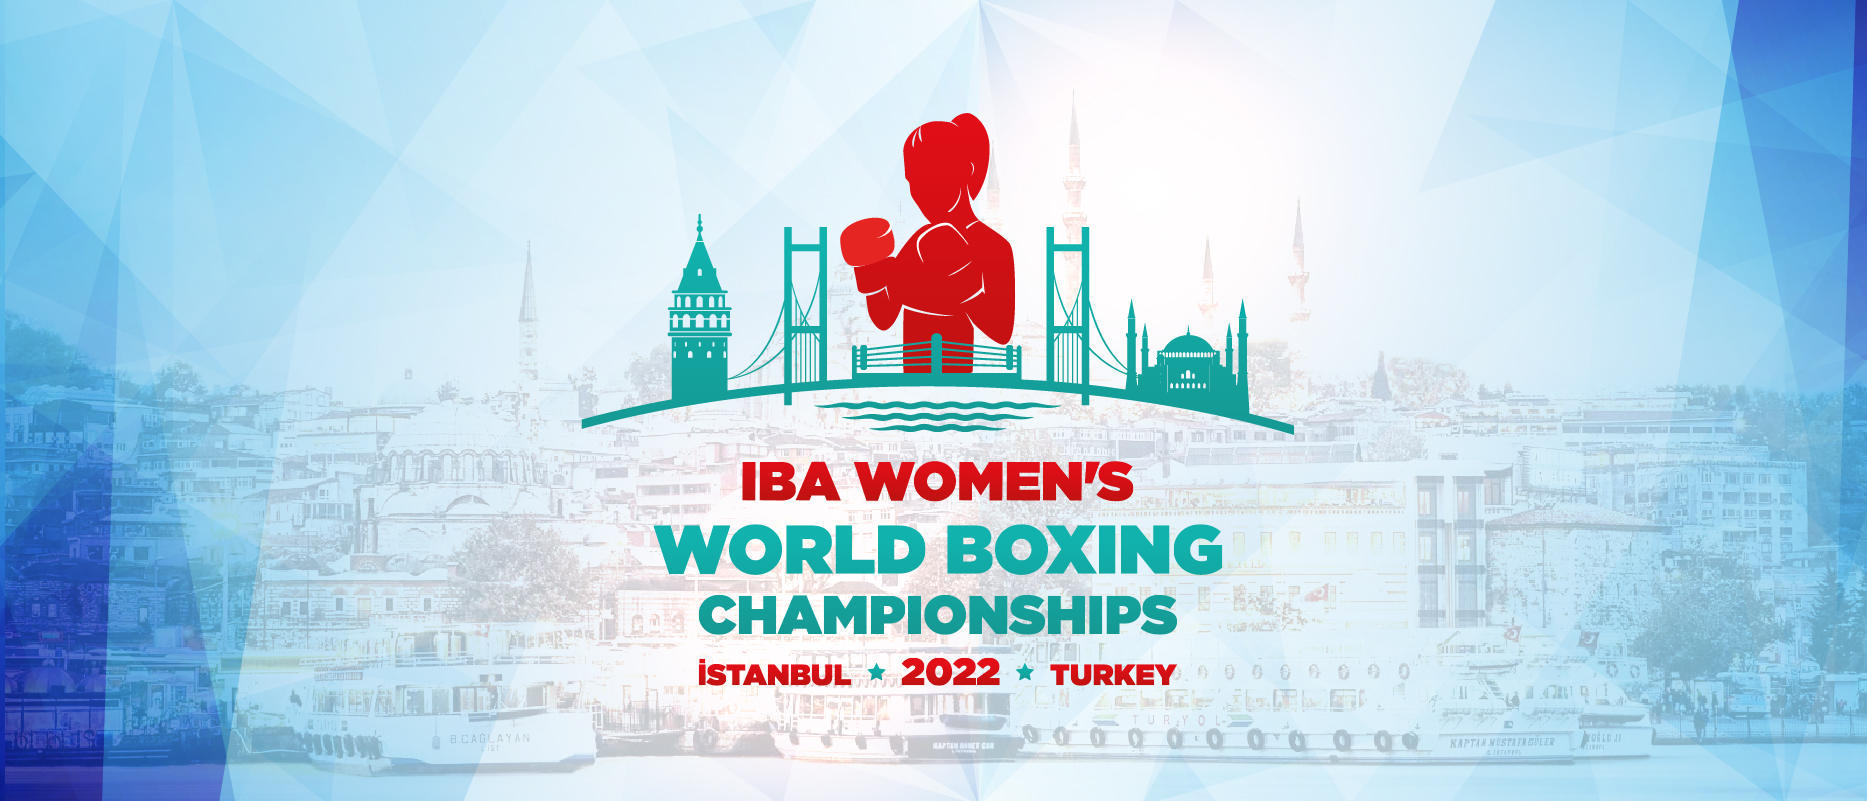 IBA Women’s World Boxing Championships: Turkey topped medal tally of 2022